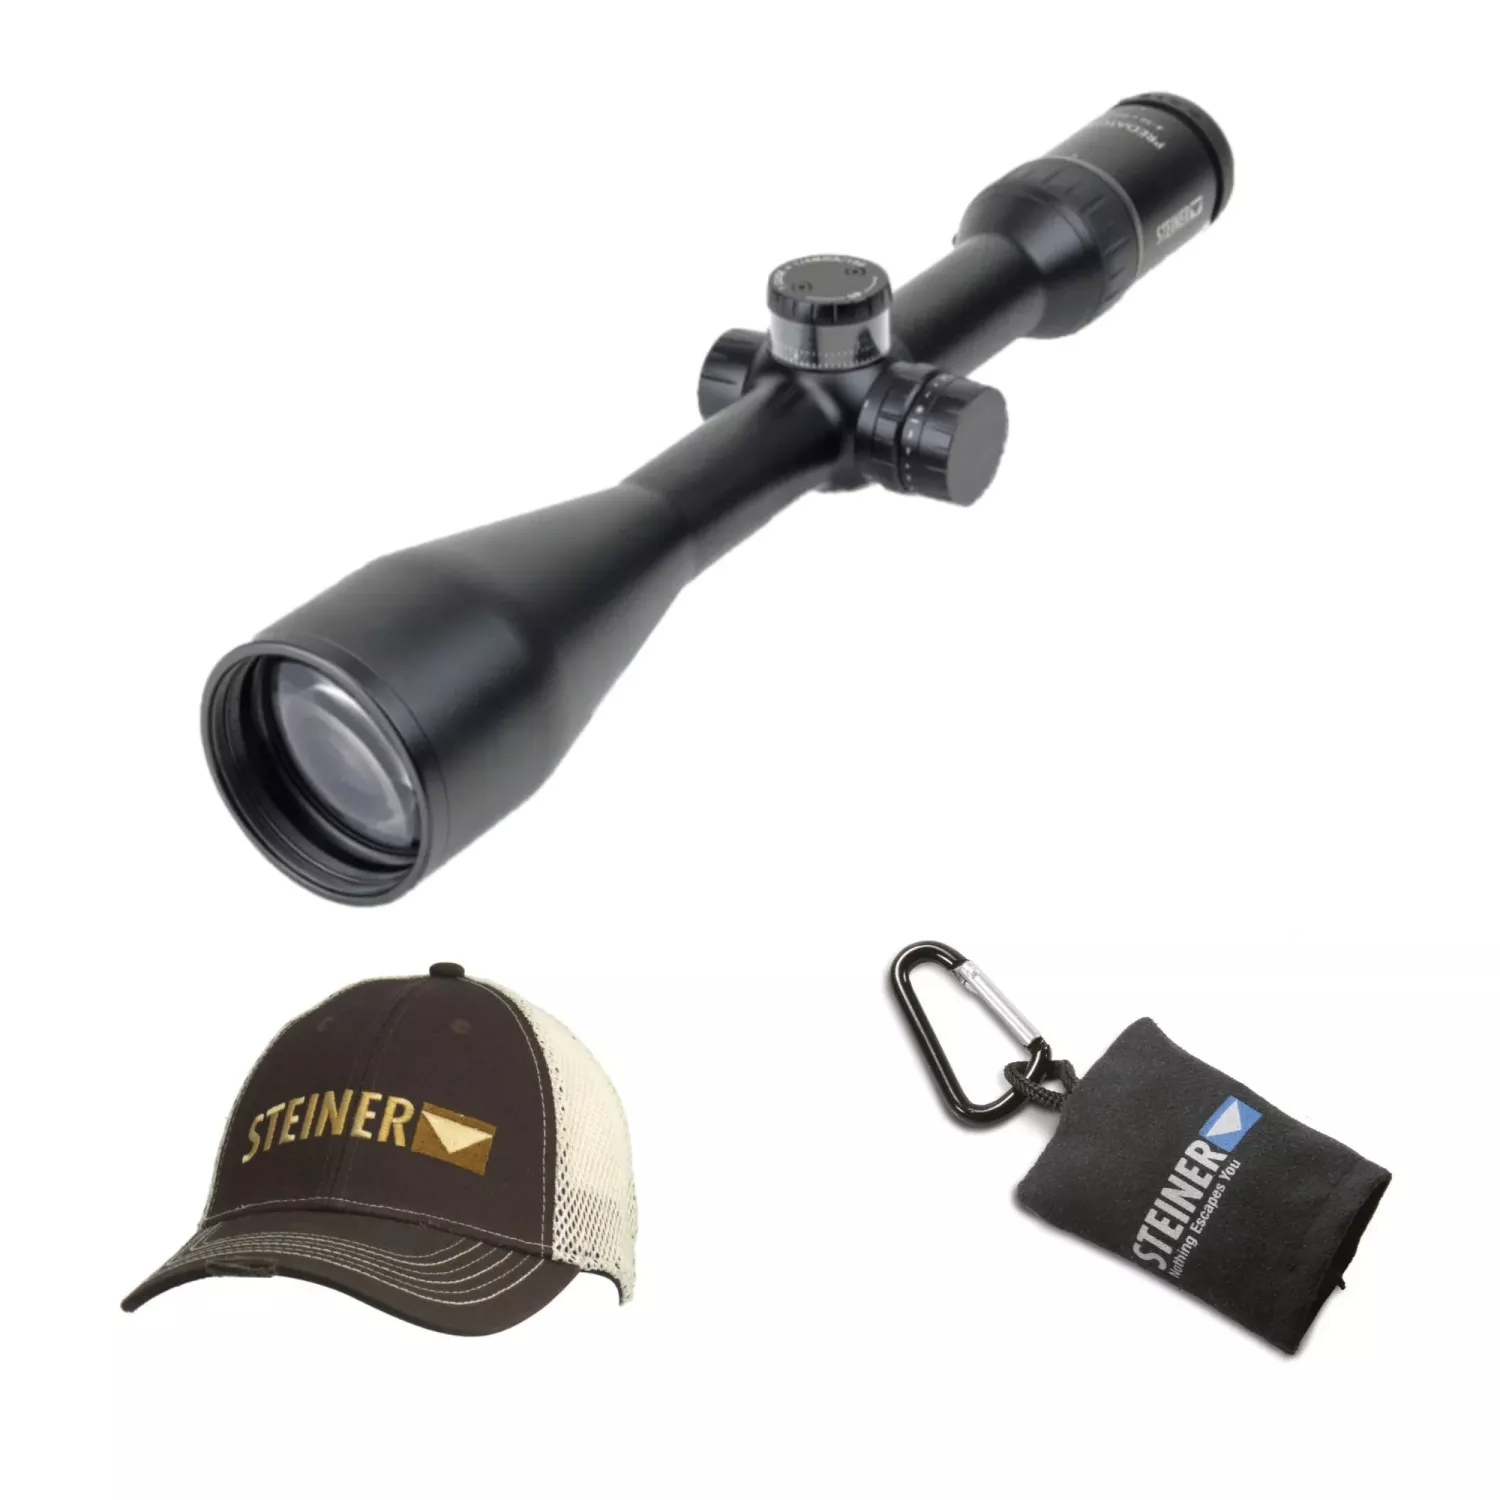 Steiner ‎Predator 8 4-32x56mm SCR Reticle and Ballistic Turret with Hat and Lens Cloth Pouch - $1999.99 (Free S/H)